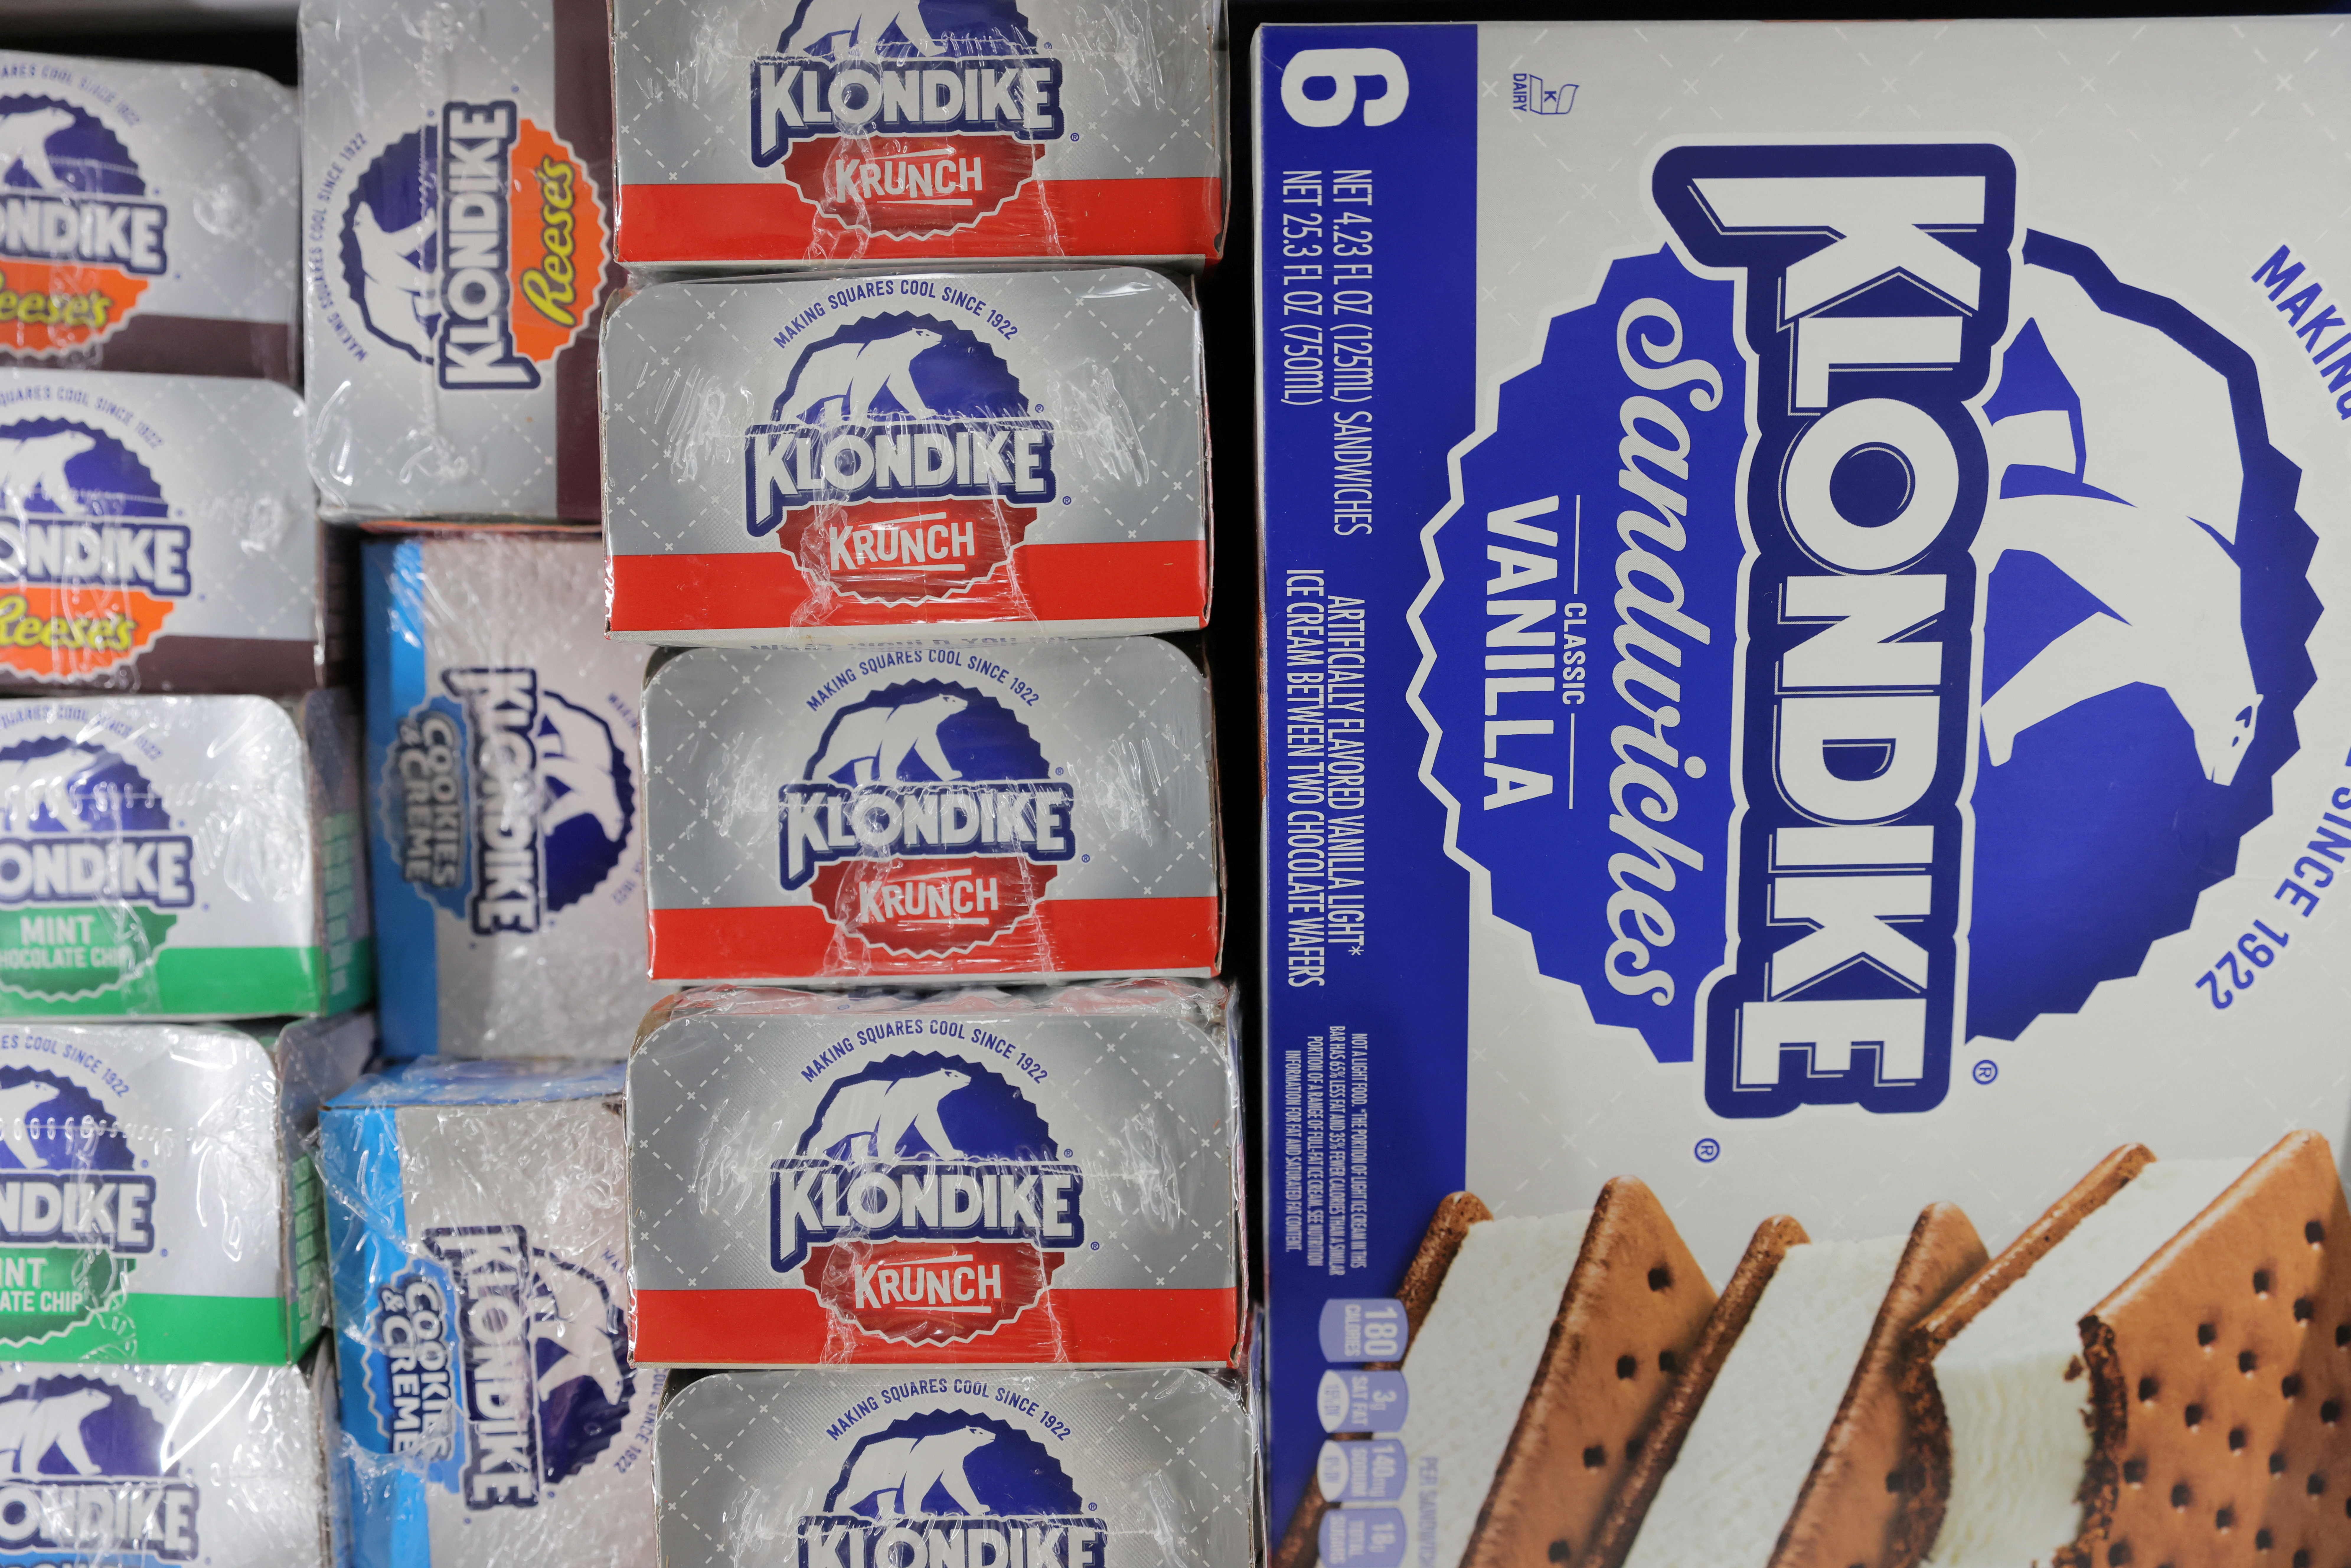 Klondike, a brand of Unilever, is seen on display in a store in Manhattan, New York City